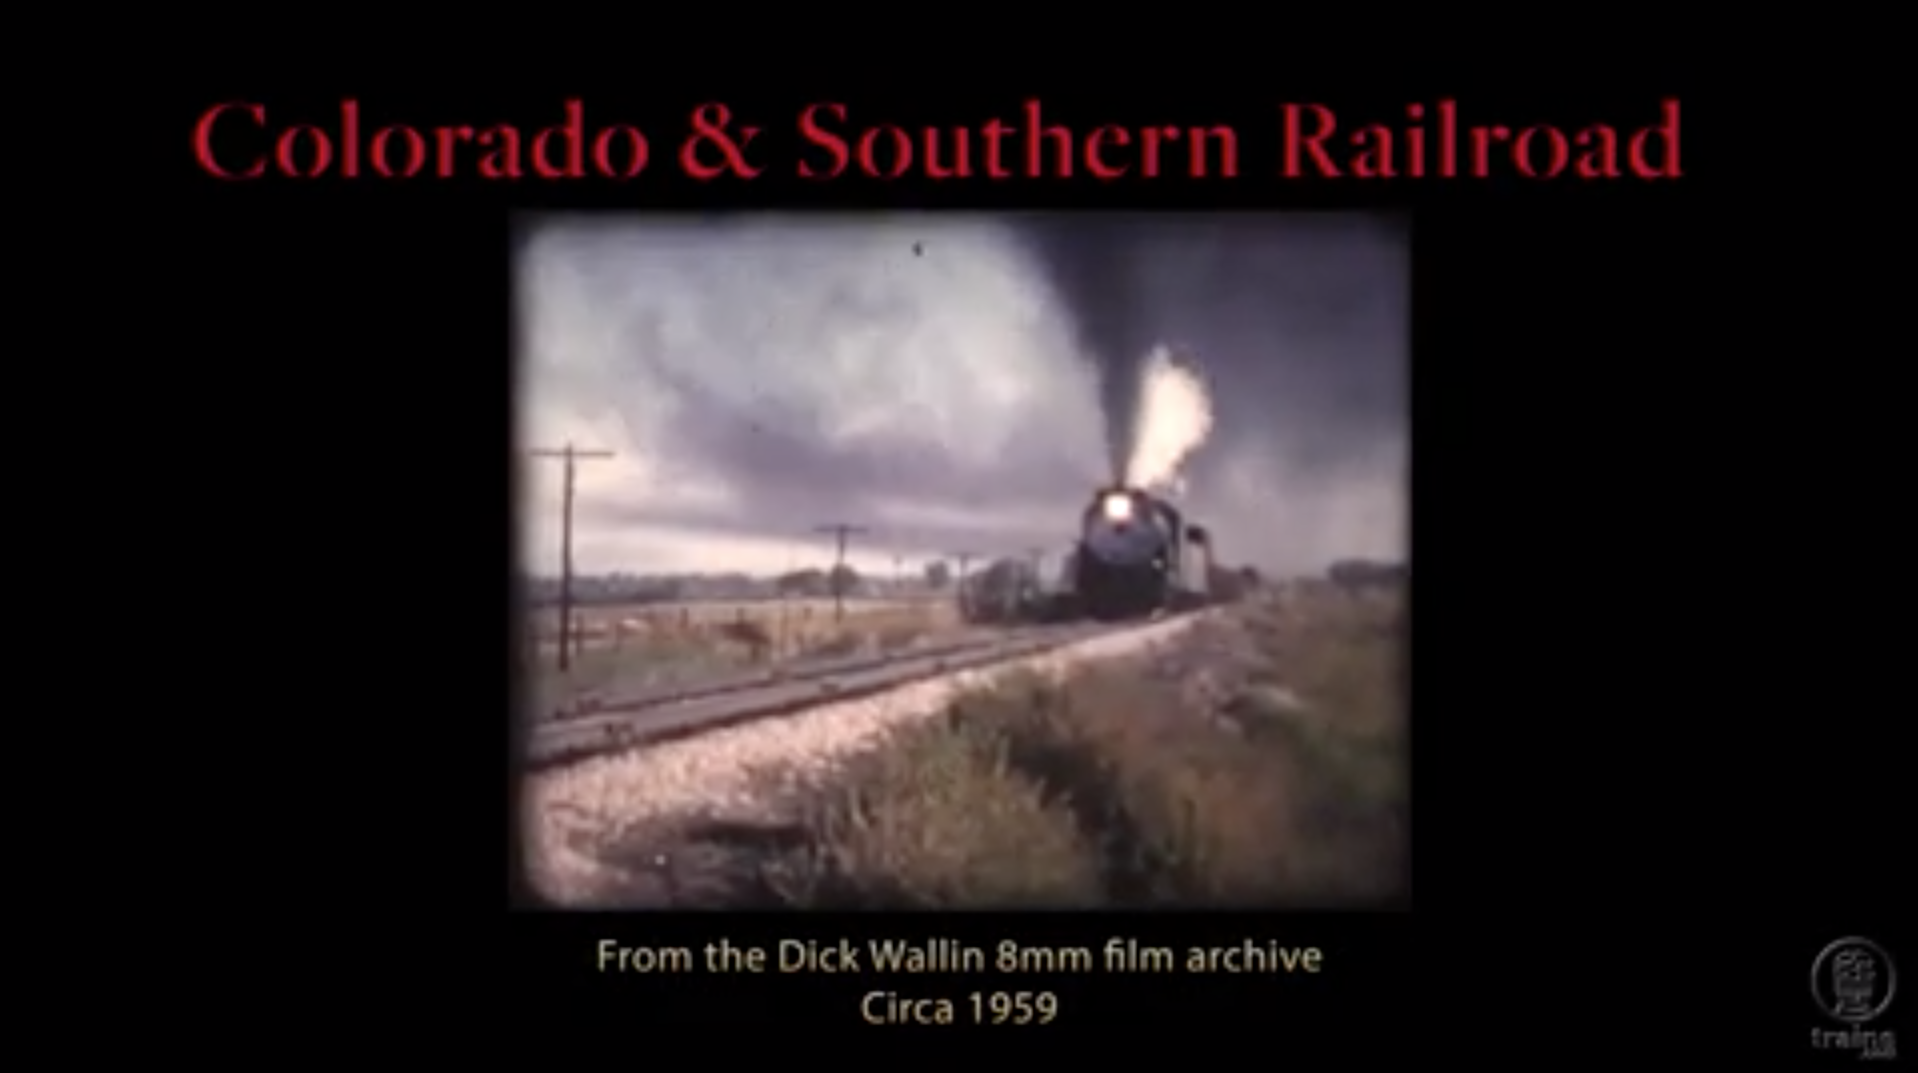 Colorado & Southern steam locomotives in the late 1950s